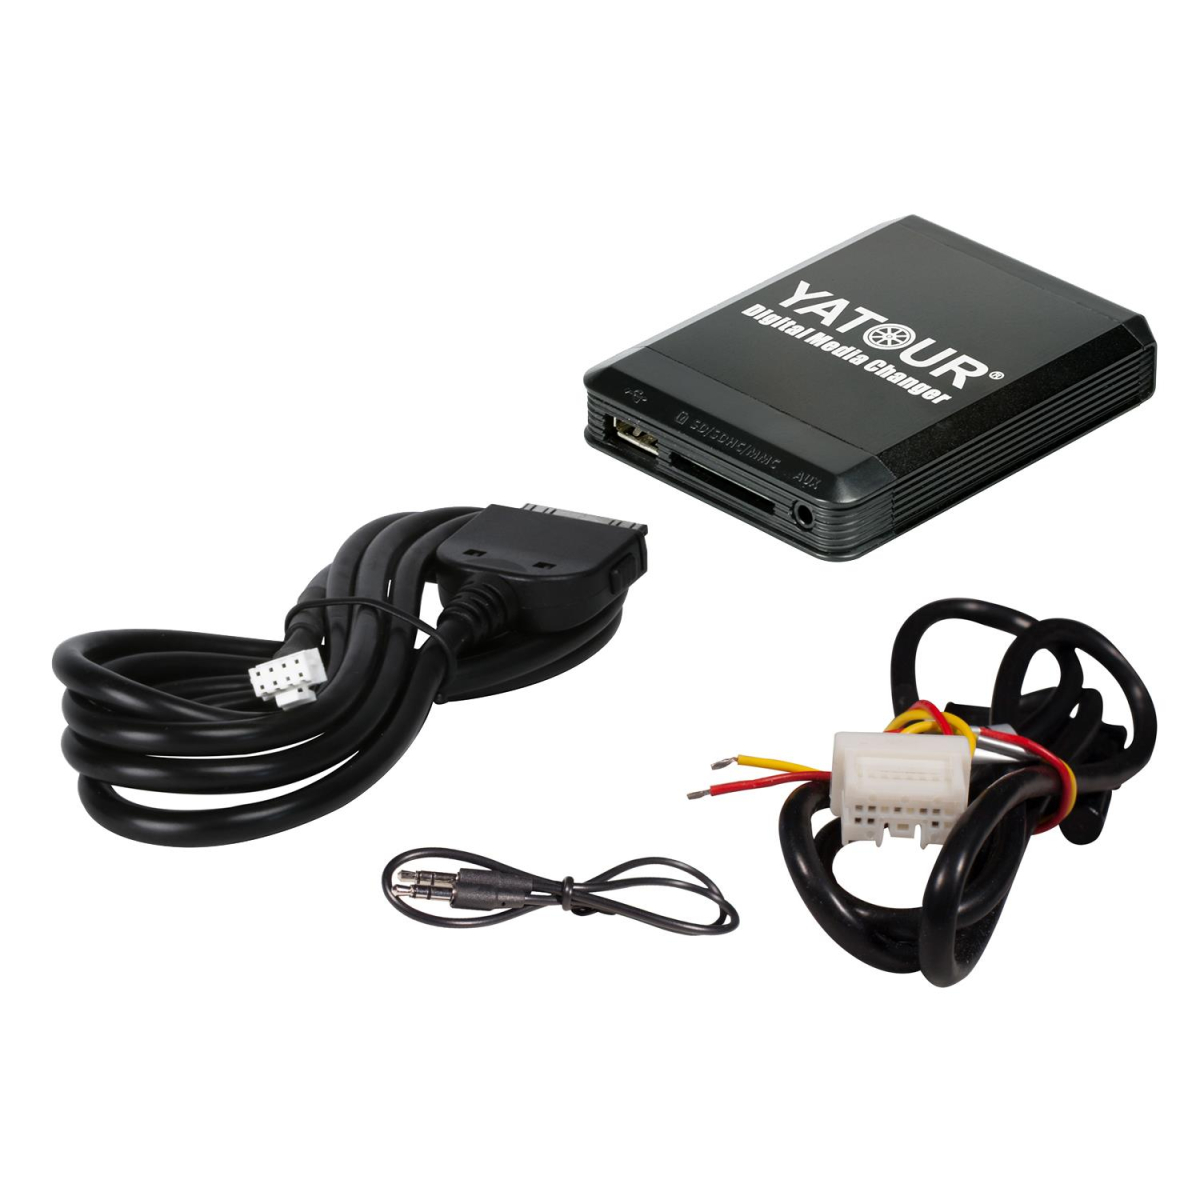 Yatour USB SD AUX iPhone iPod iPad + Buetooth for Nissan